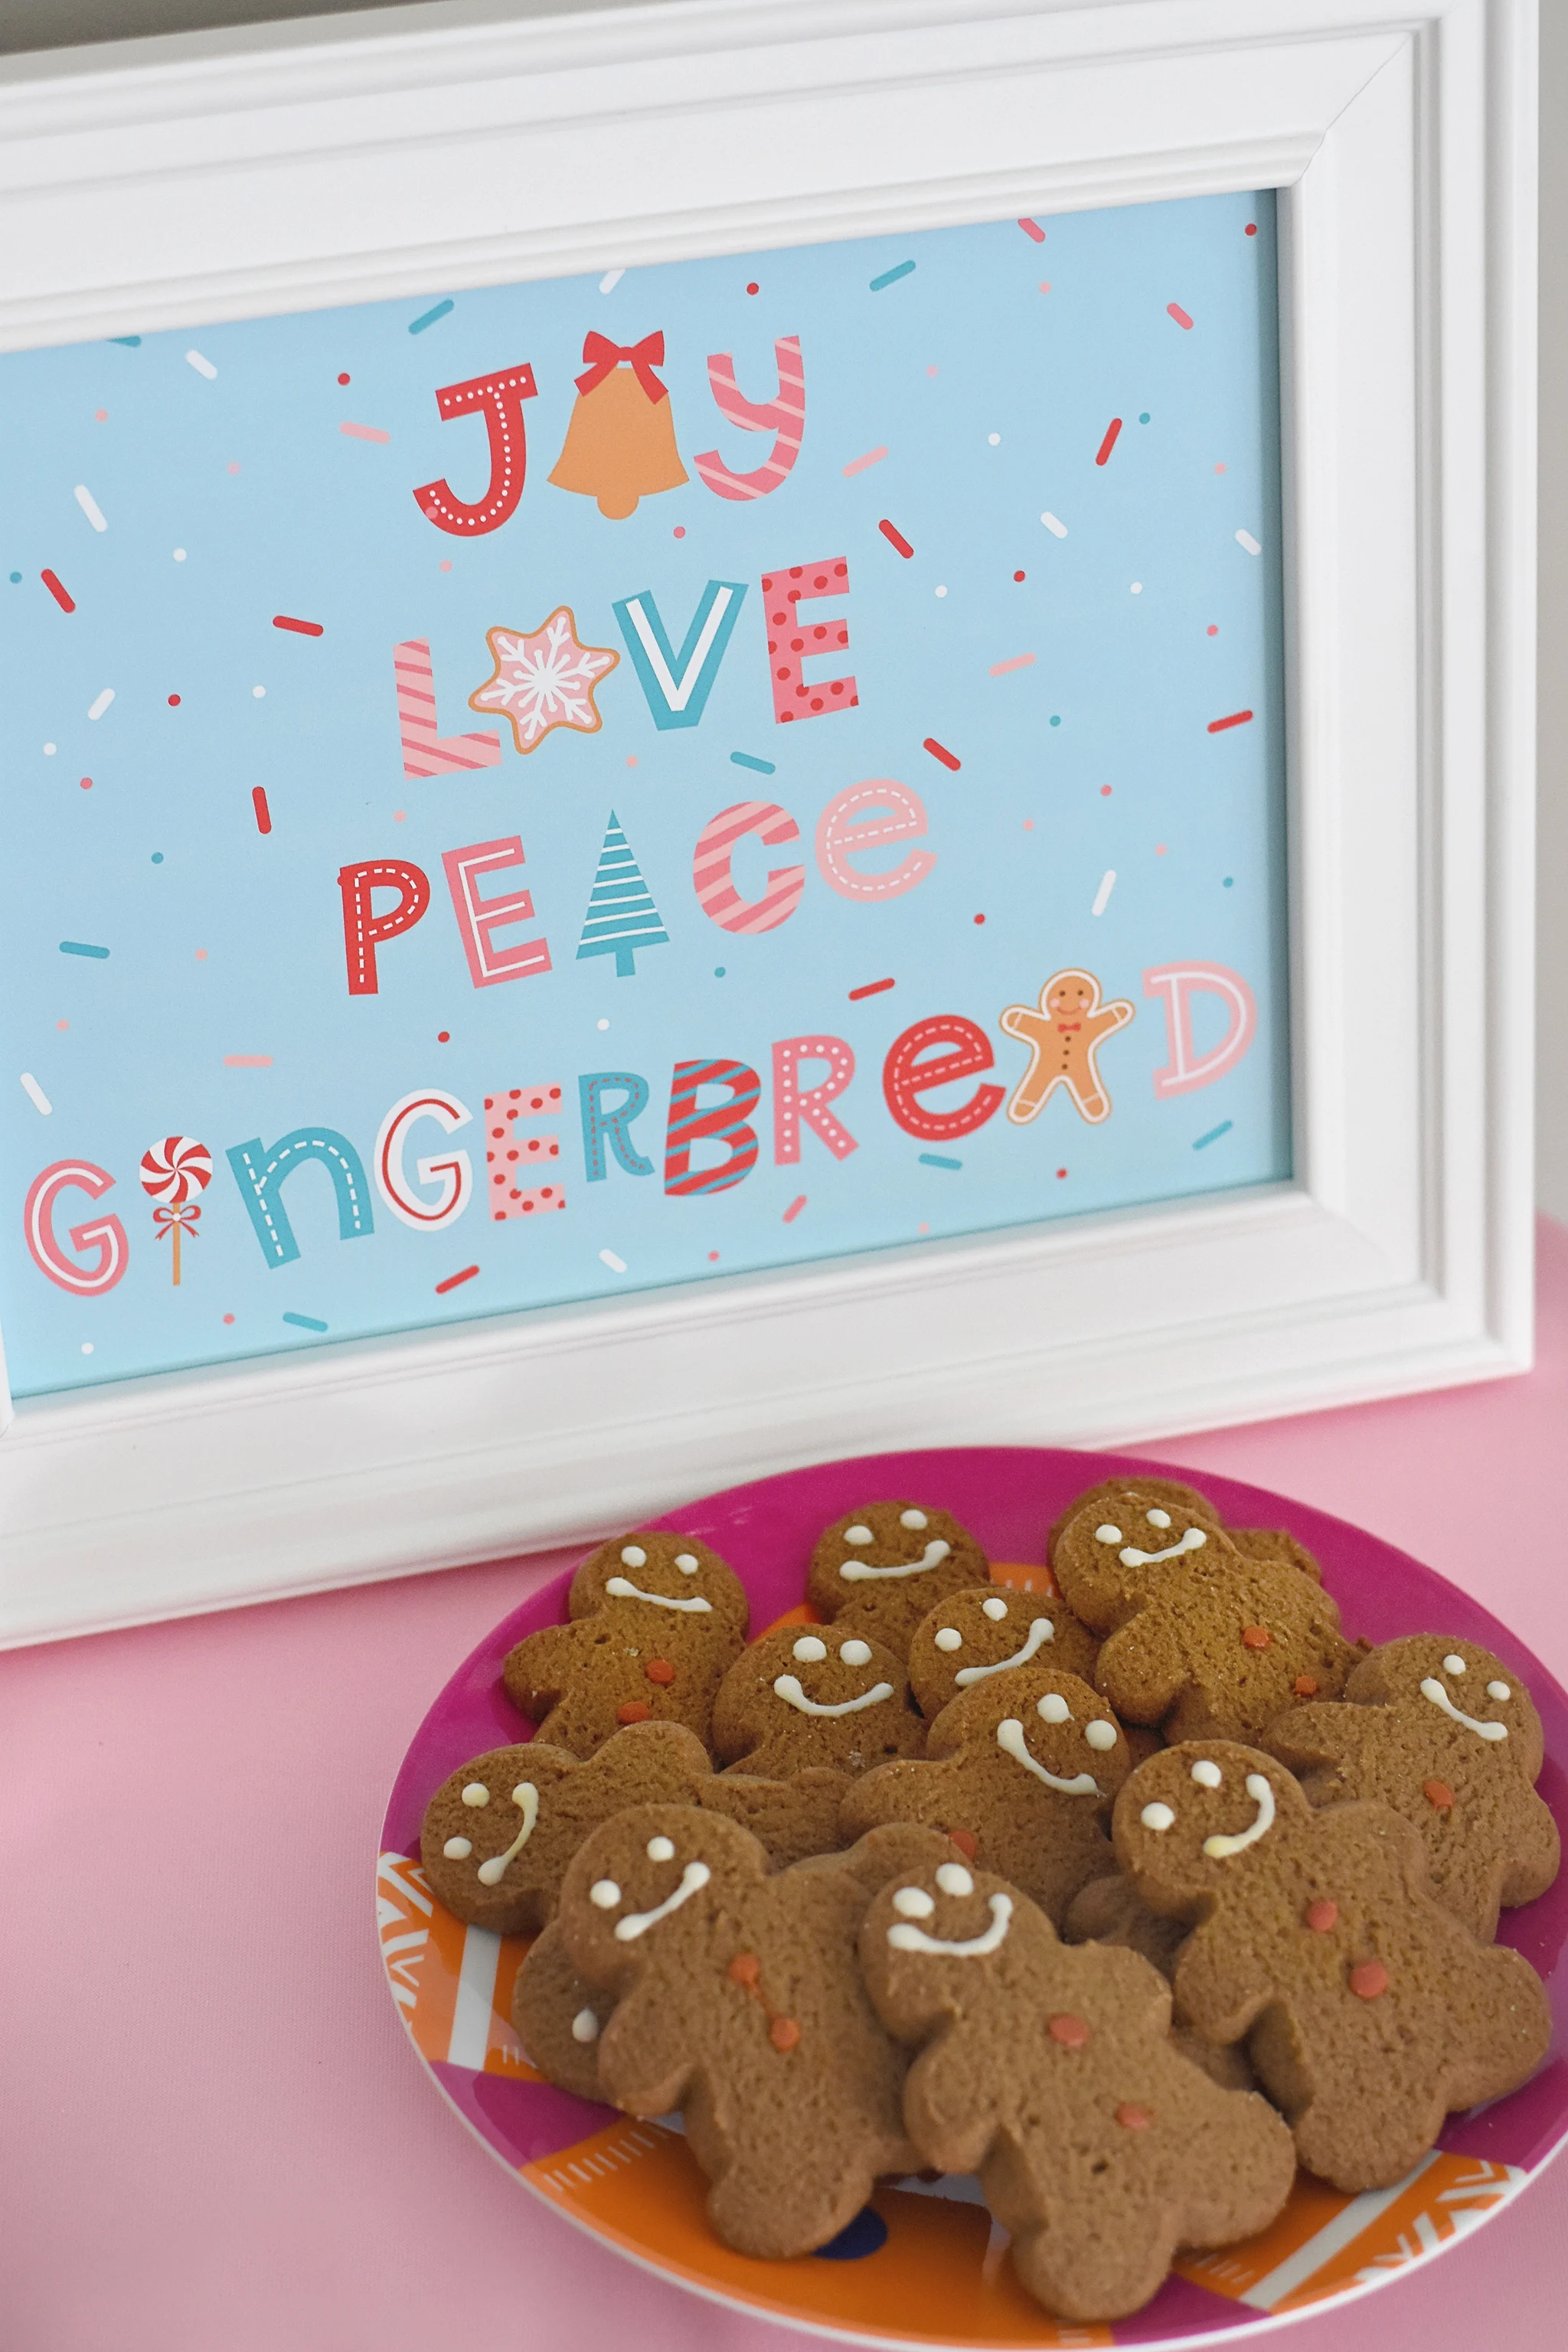 Joy, Love, Peace, and Gingerbread!